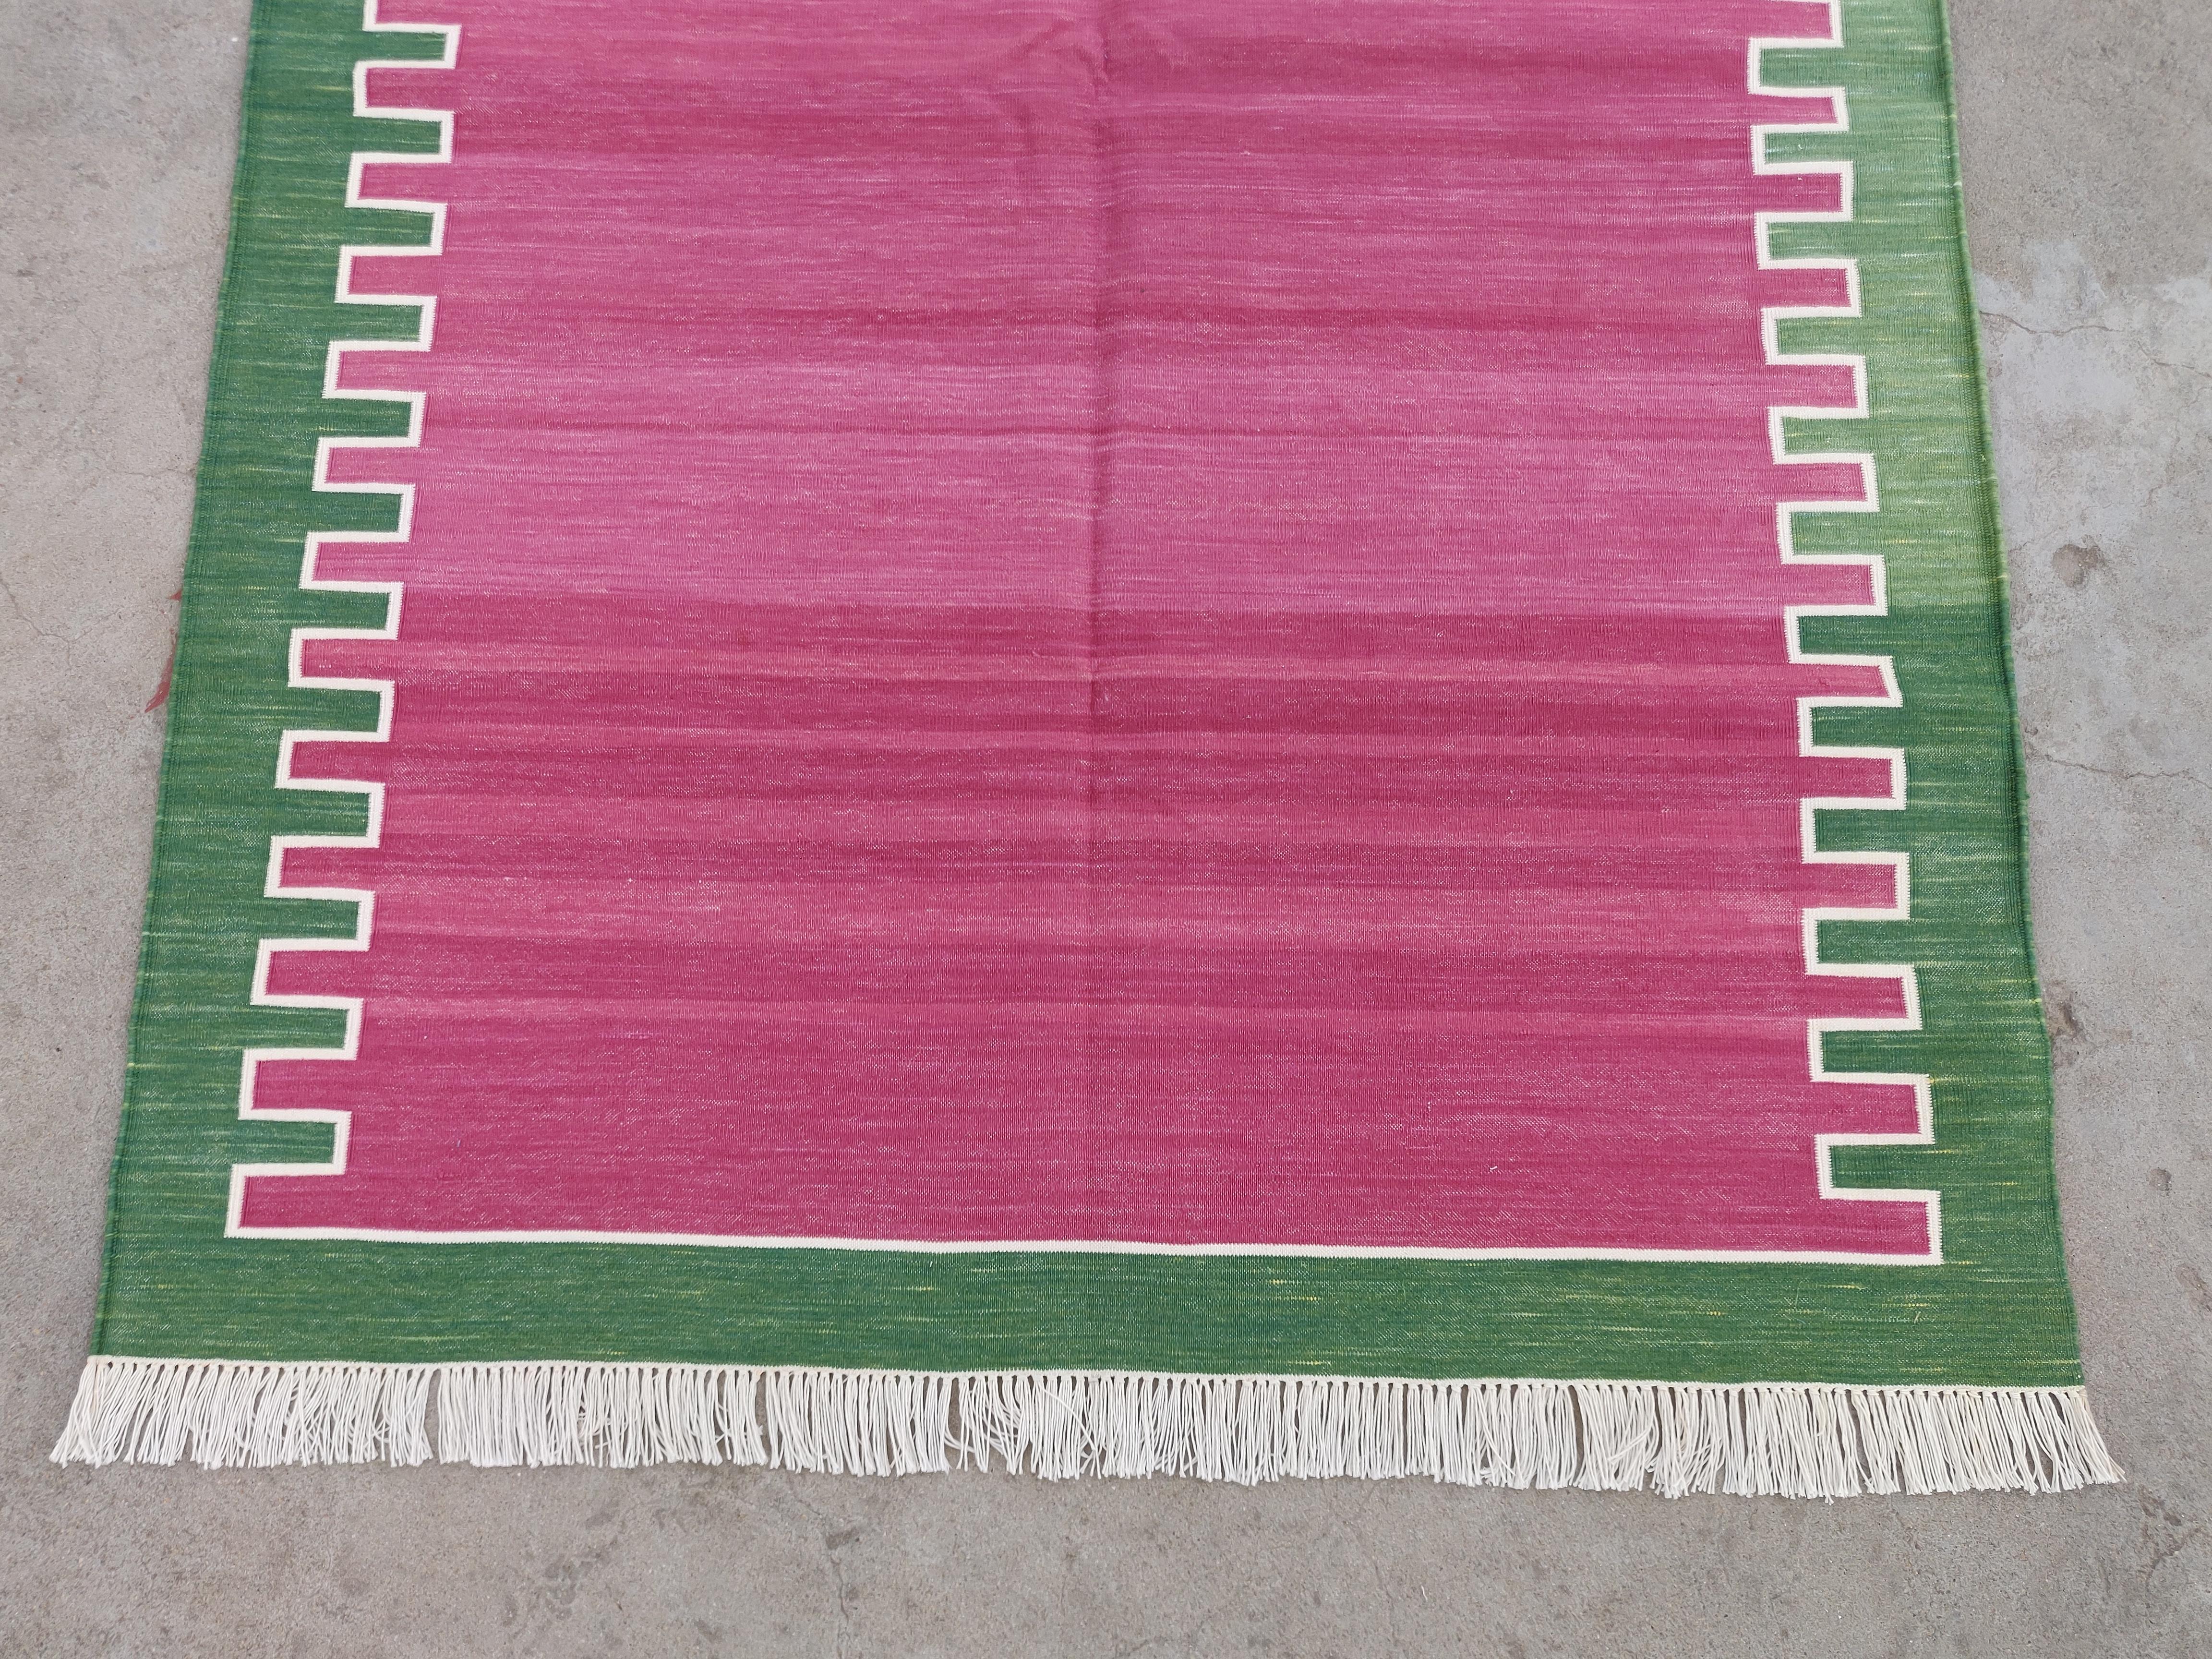 Contemporary Handmade Cotton Area Flat Weave Rug, 4x6 Pink And Green Striped Indian Dhurrie For Sale